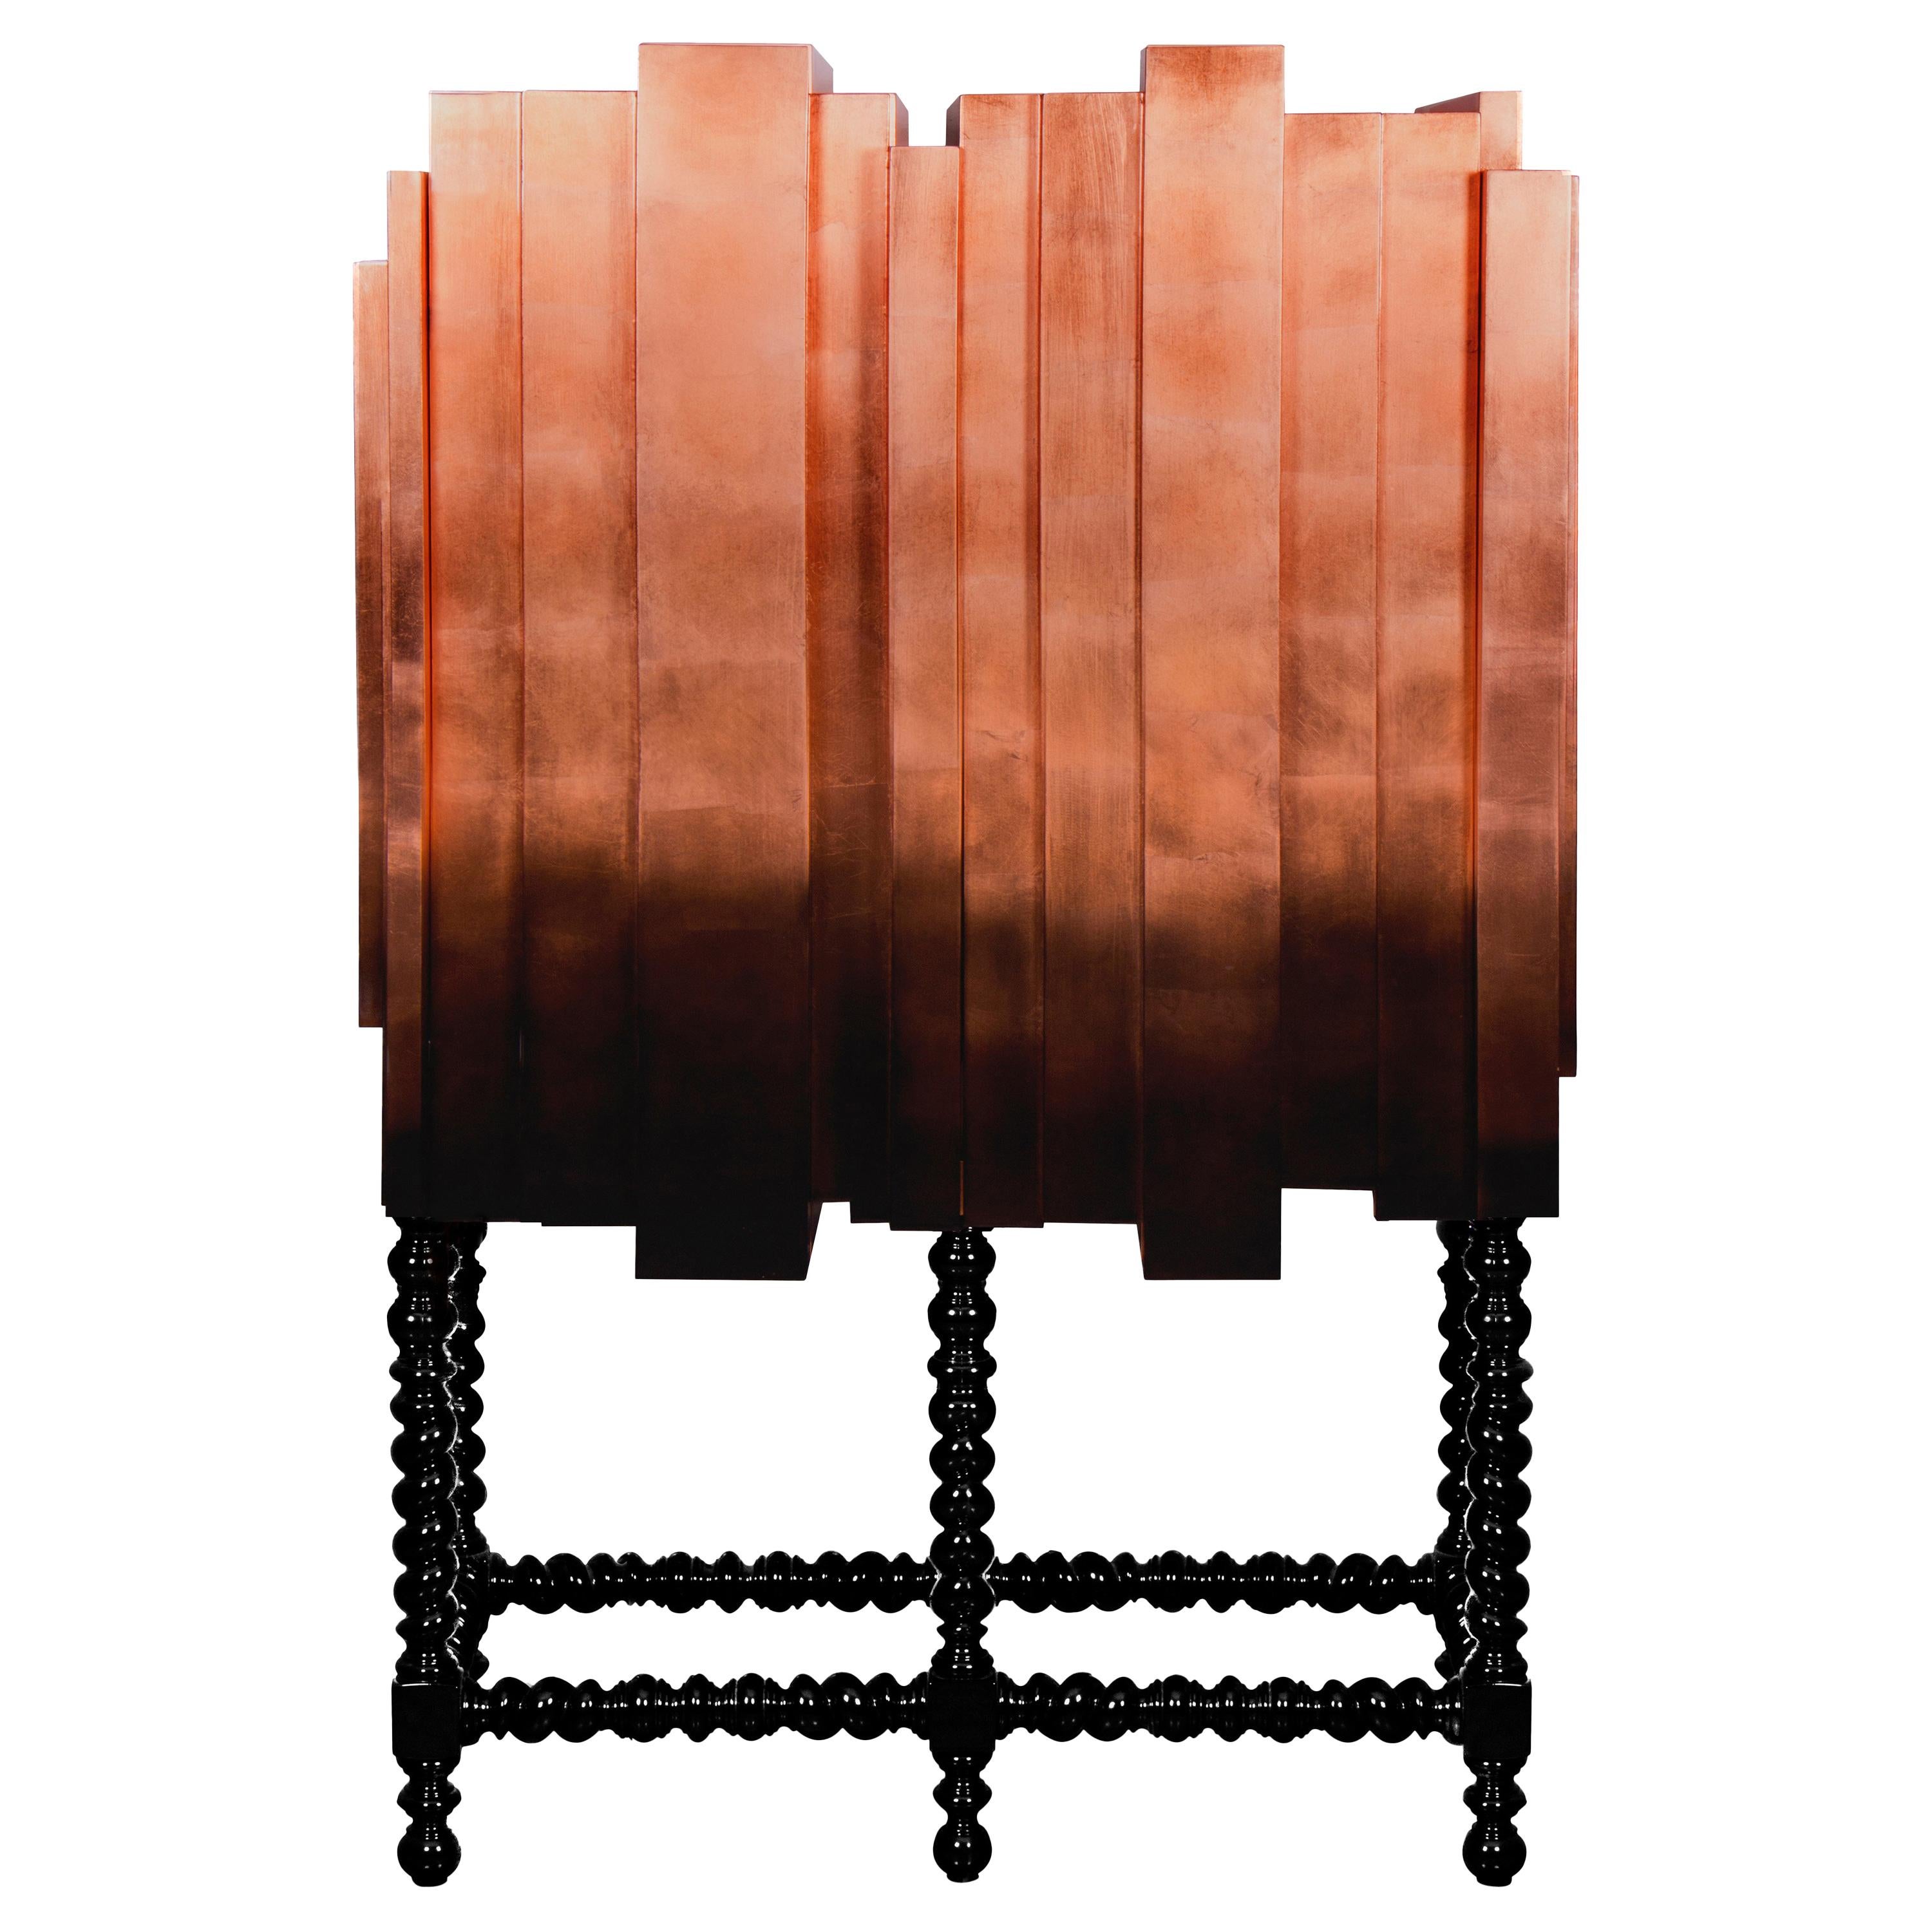 This unique and contemporary cabinet is inspired by the Manueline style, a style of architectural ornamentation of the first decades of the 16th century. A perfect symbiosis of innovative design and techniques with historic heritage. The body is